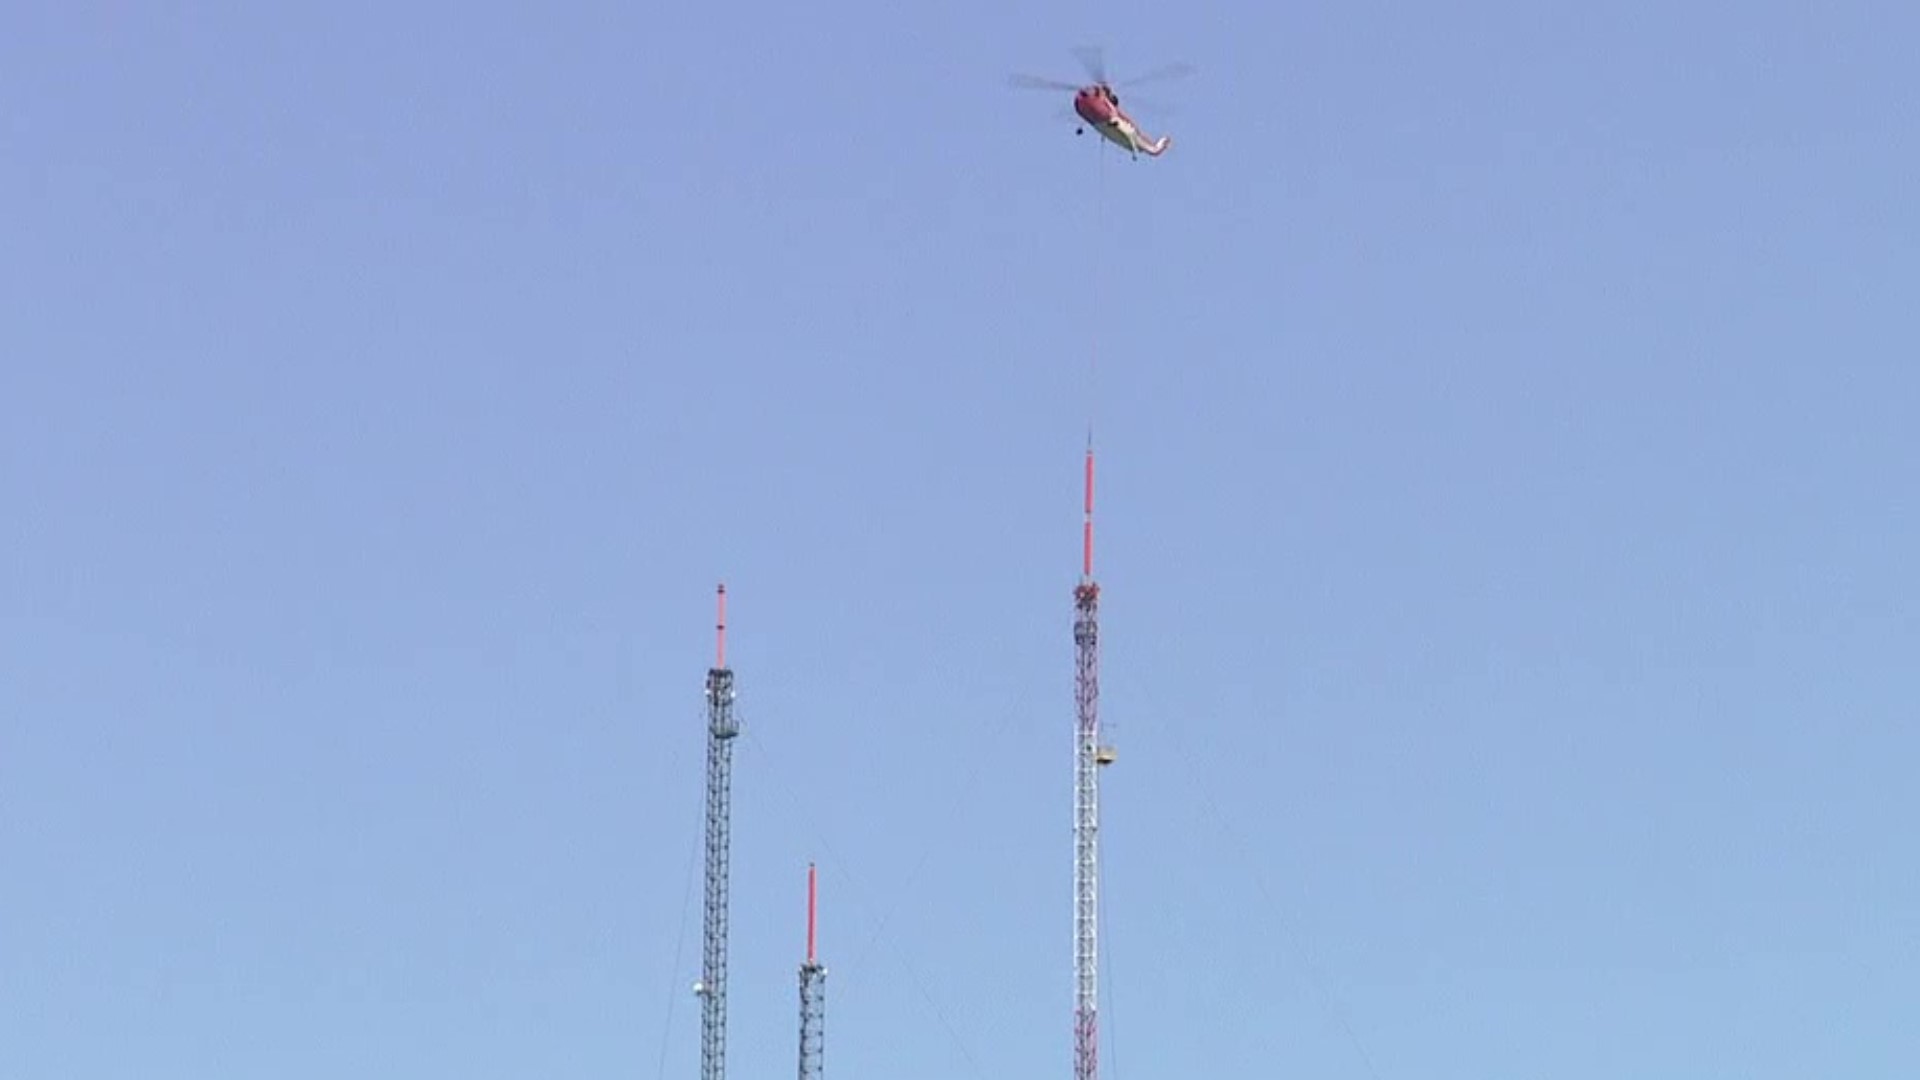 Crews used the helicopter to set the tower upright.